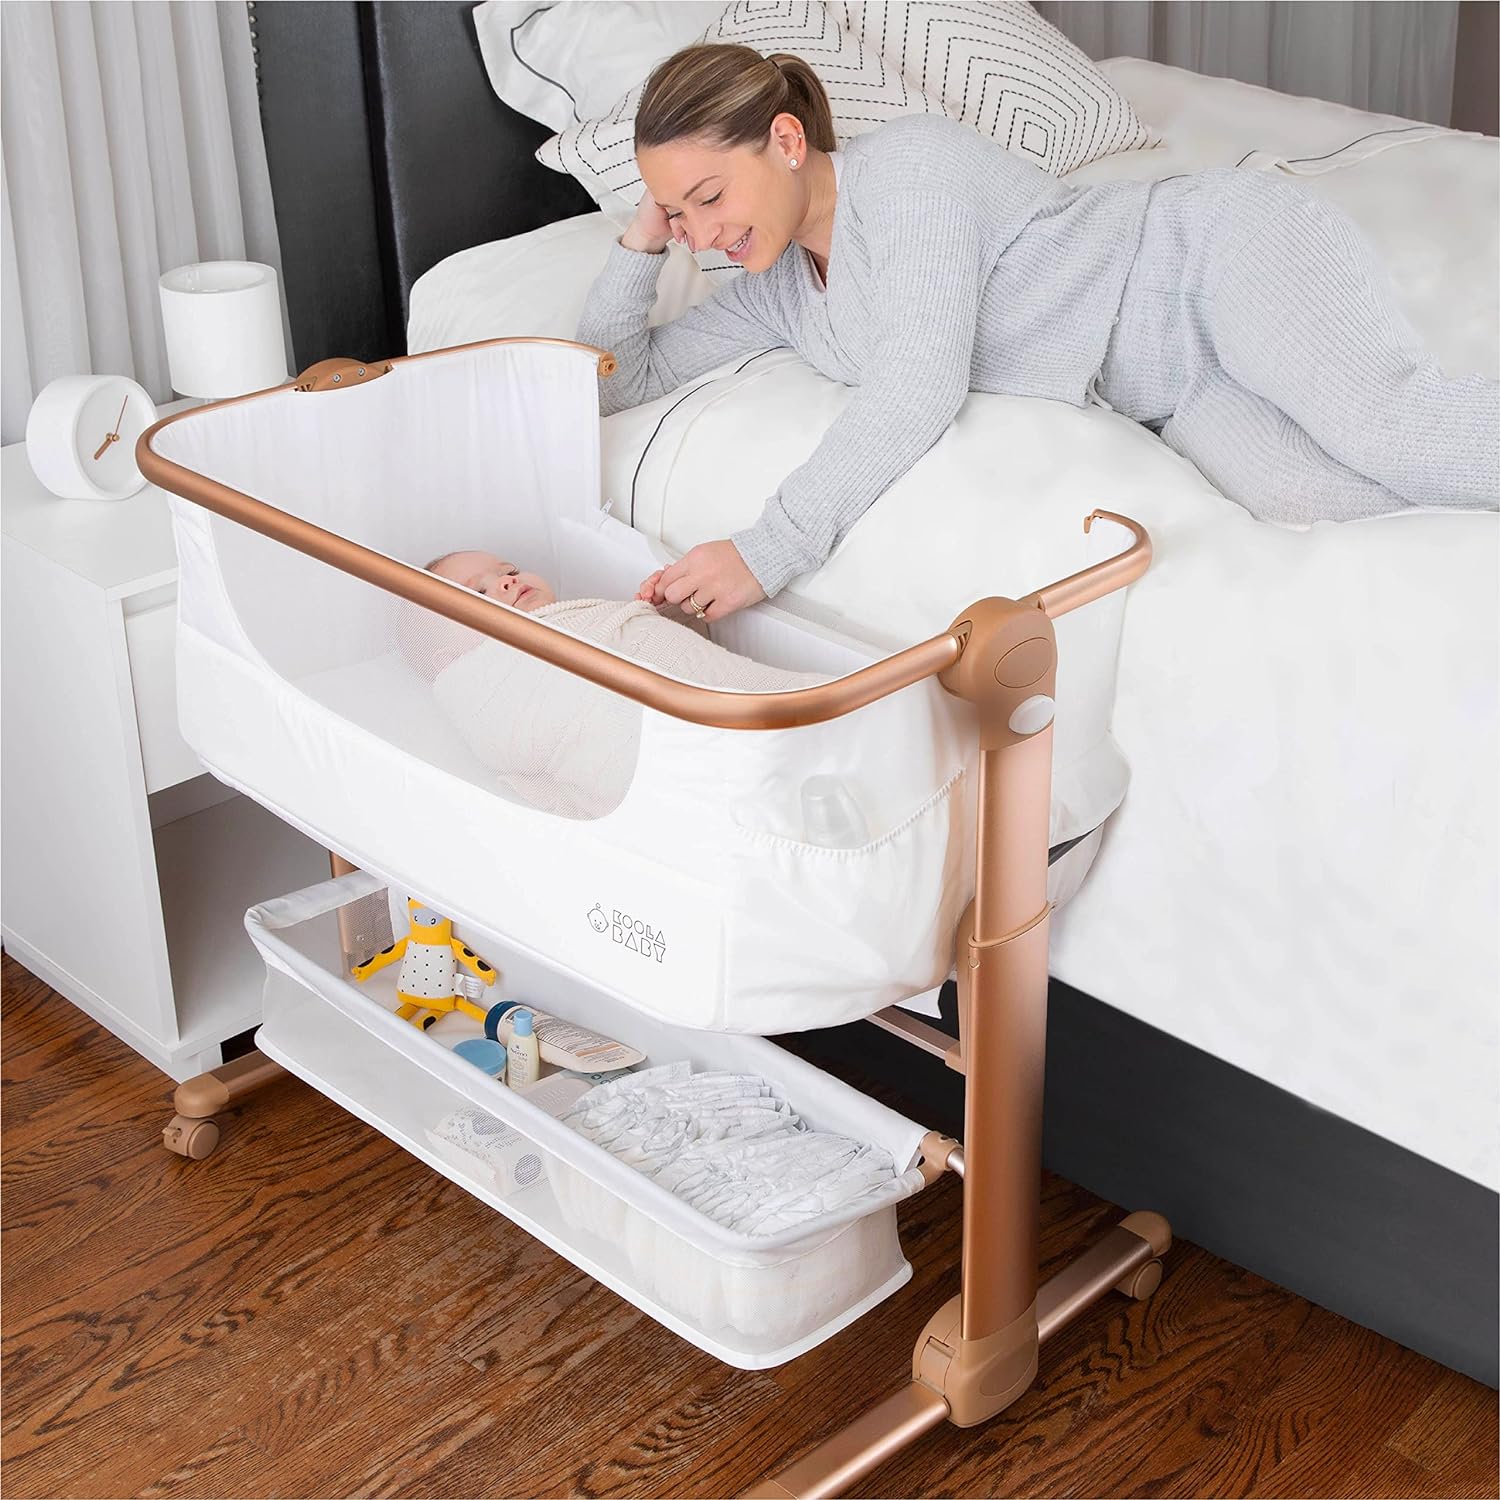 New Price Alert: KoolerThings Baby Bassinet, Bedside Sleeper for Baby - Limited-Time Discounts!